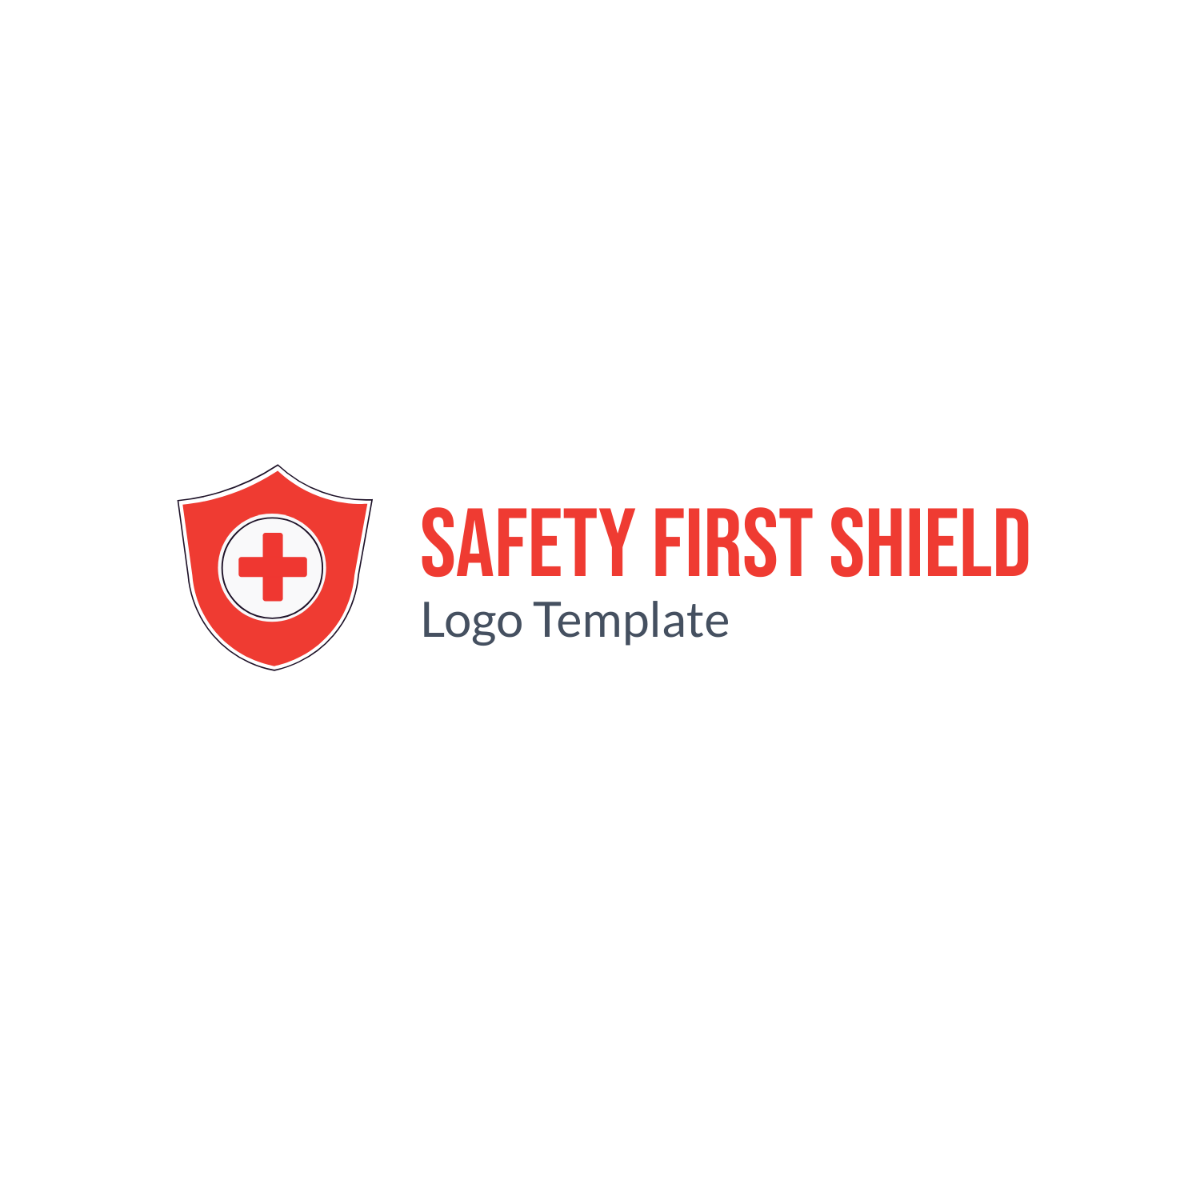 Safety First Shield Logo Template